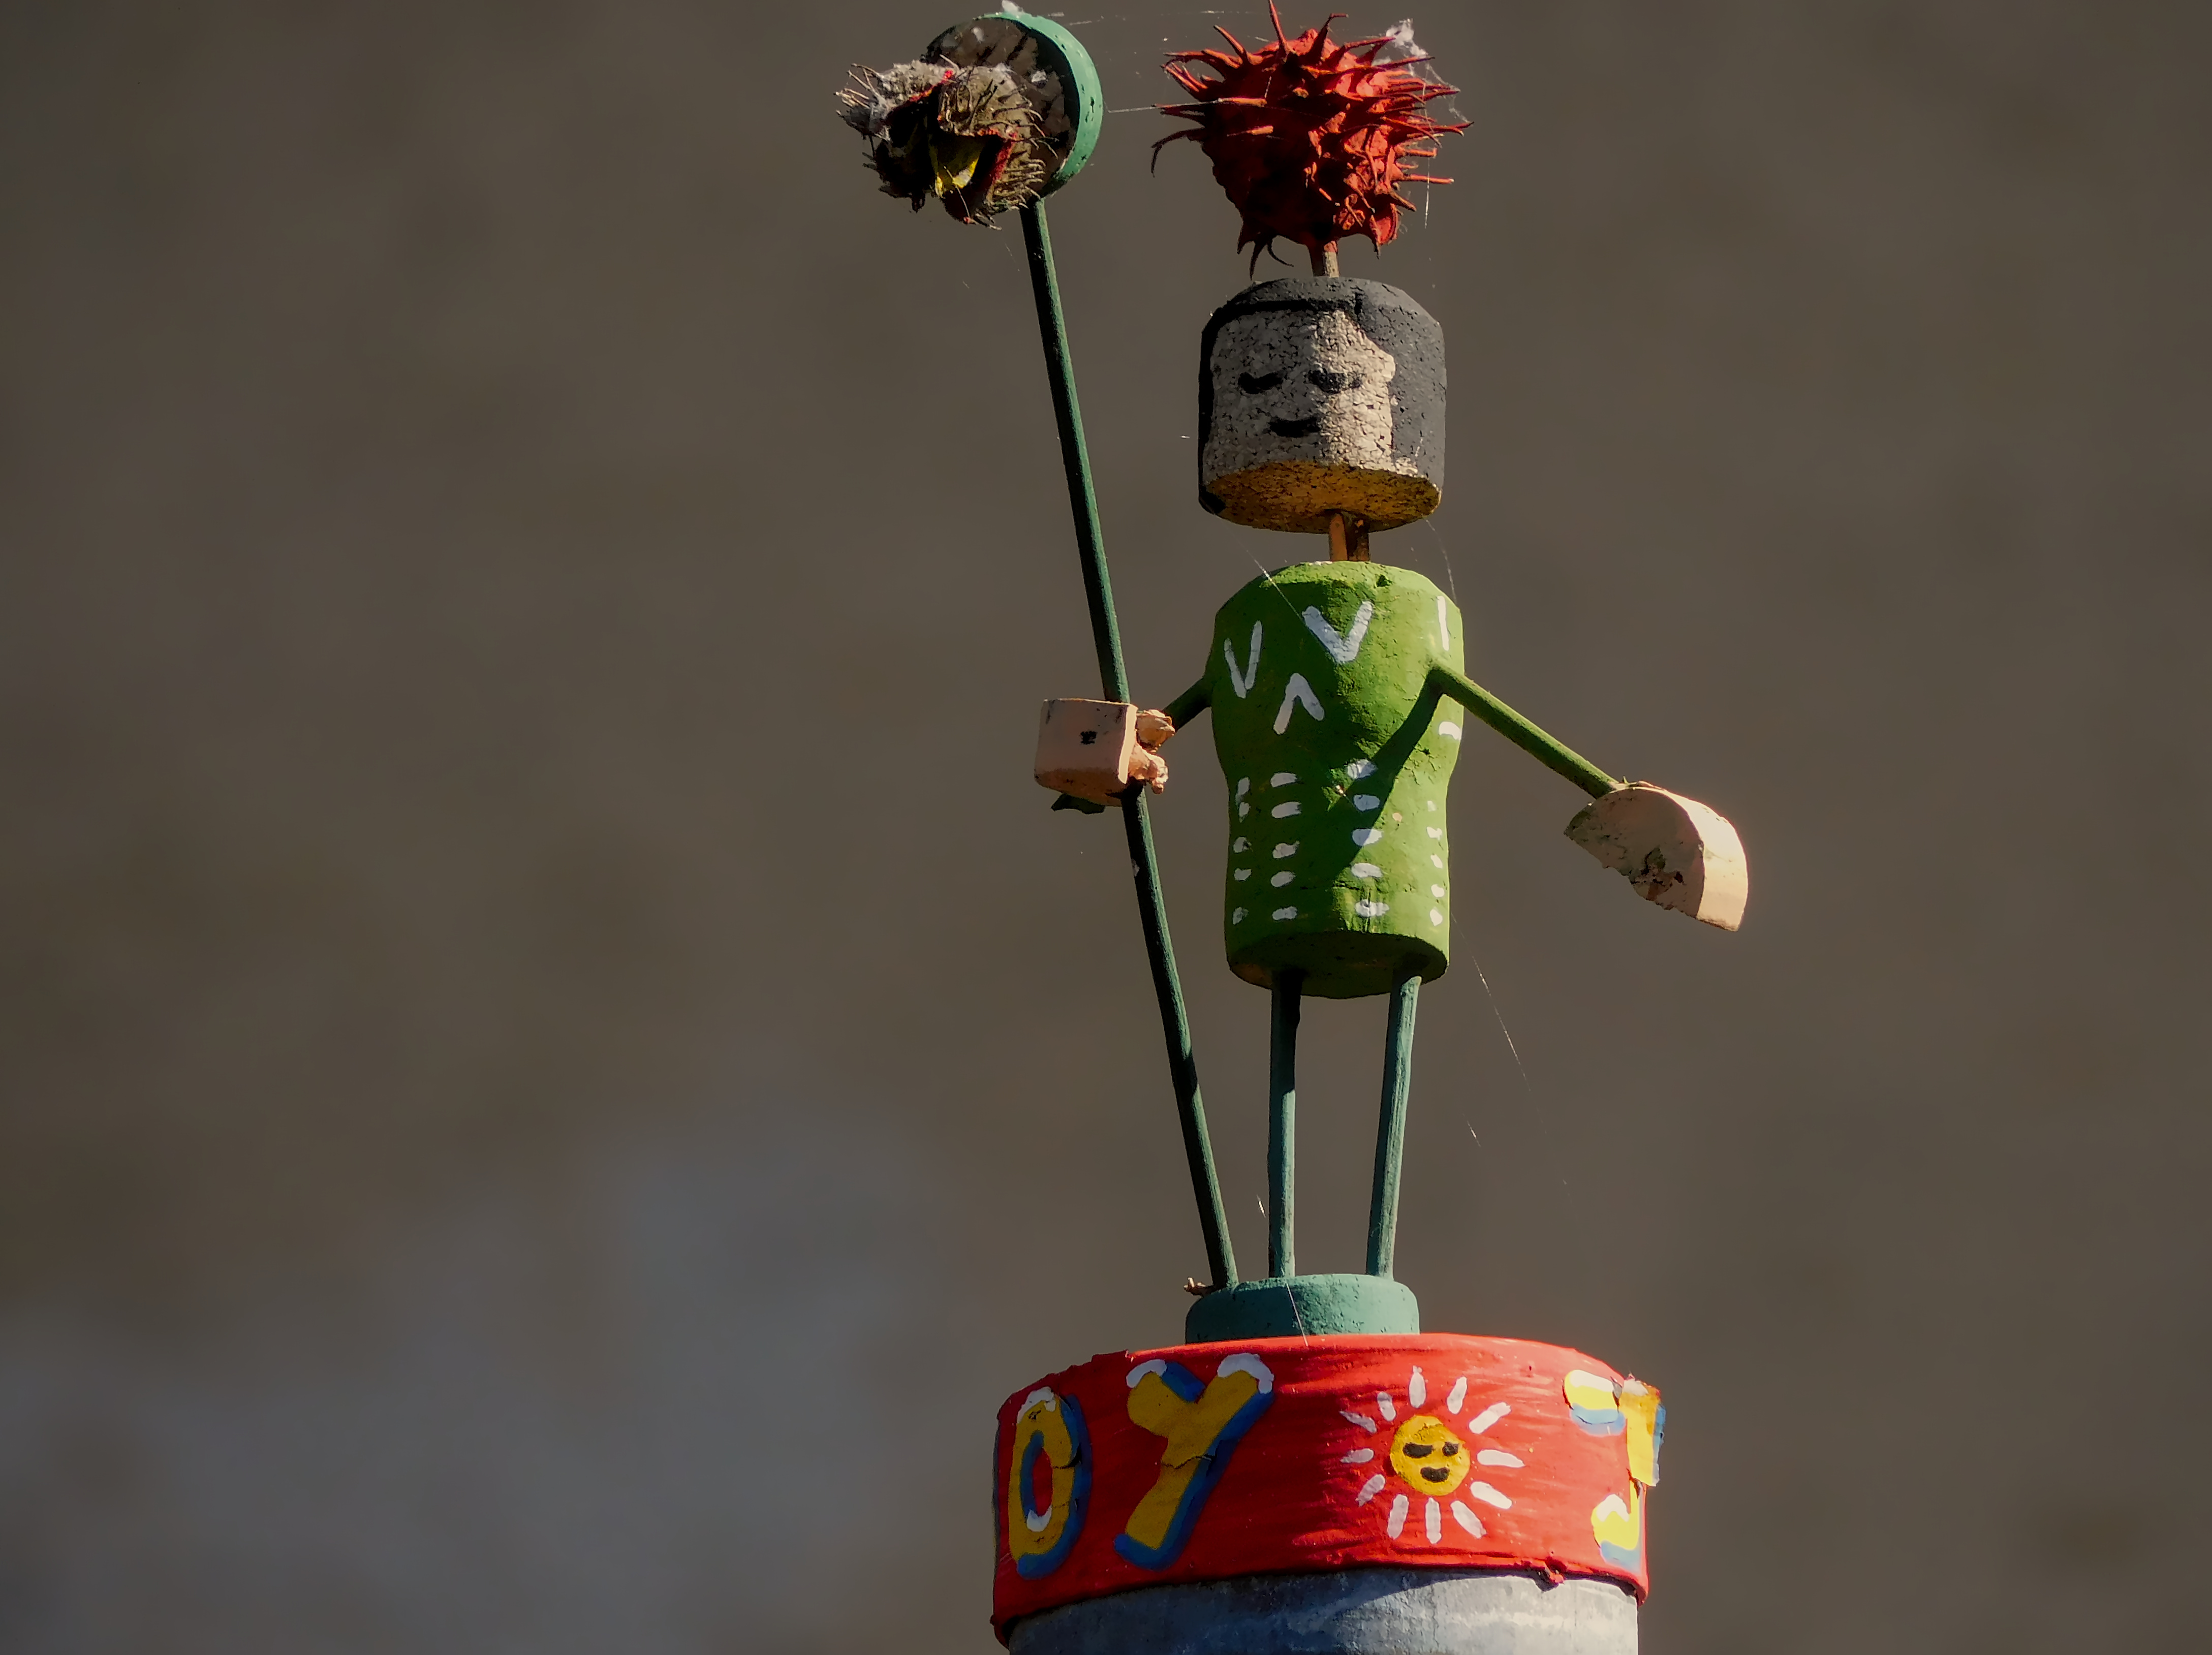 A painted cork-man on top of a street sign